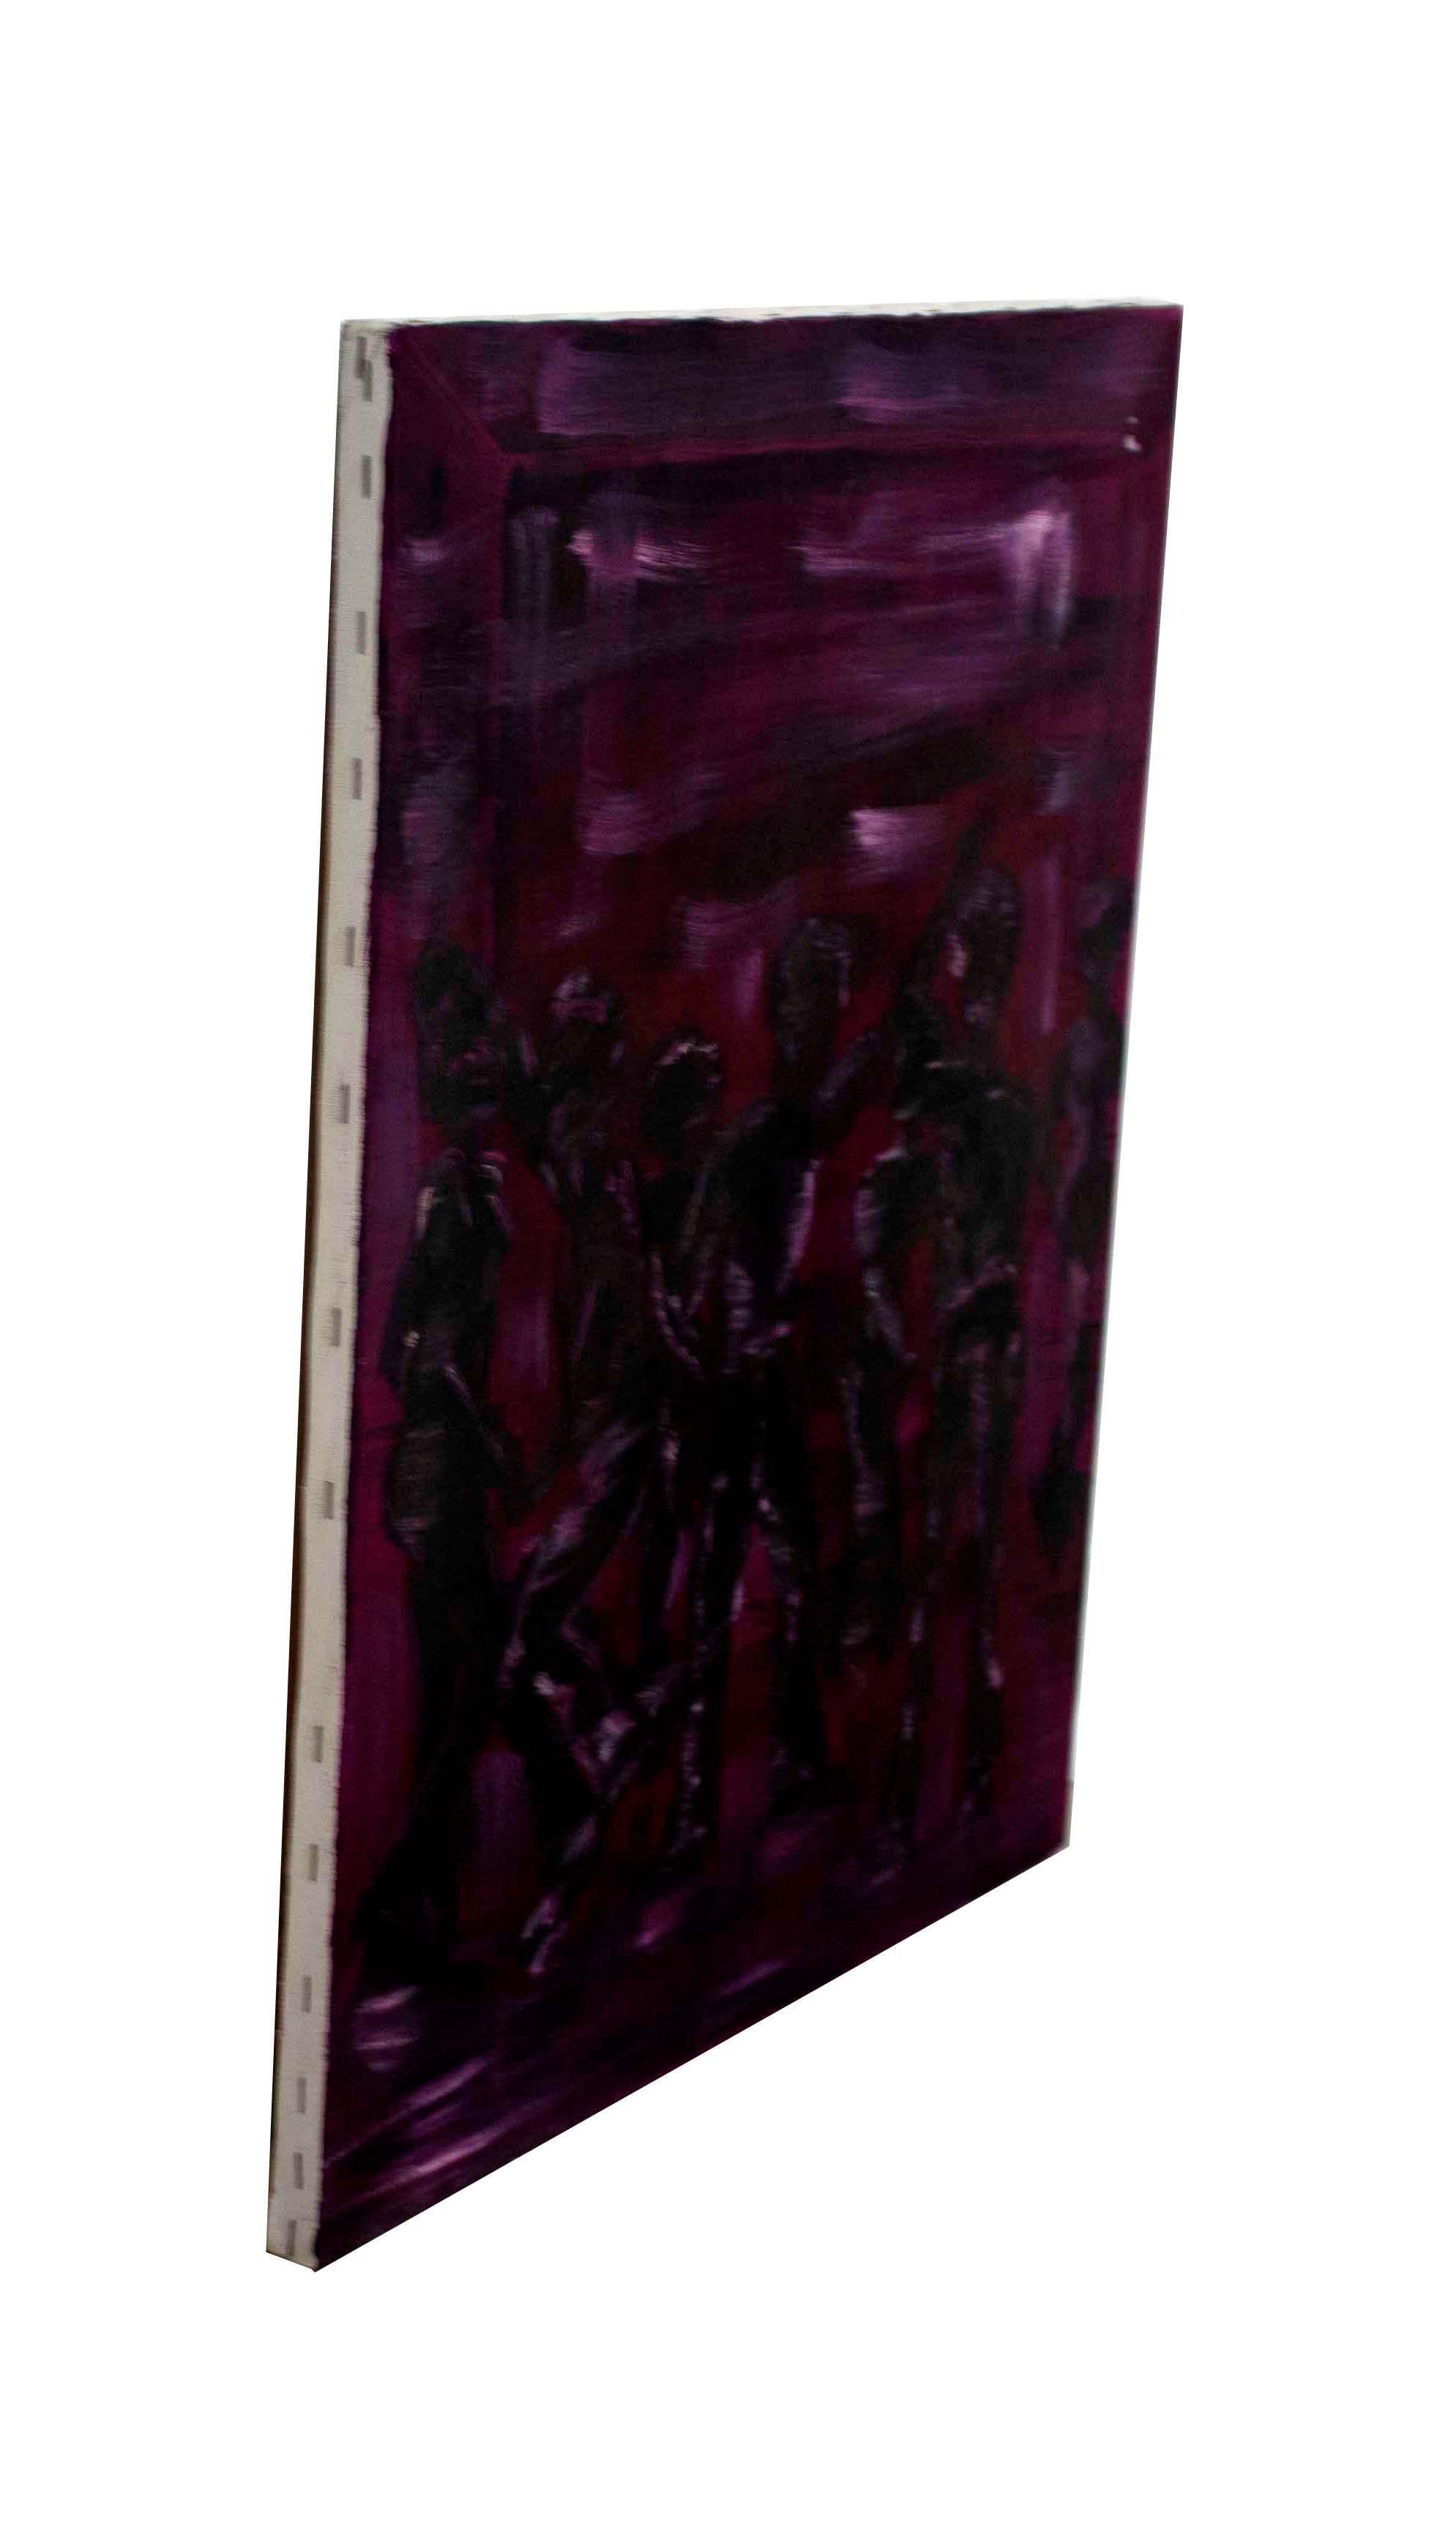 For your consideration is an energetic contemporary acrylic painting on canvas depicting dancing figures in purple. 

This painting was acquired from a curator and gallery owner from Los Angeles with a collection of artworks ranging from Barry